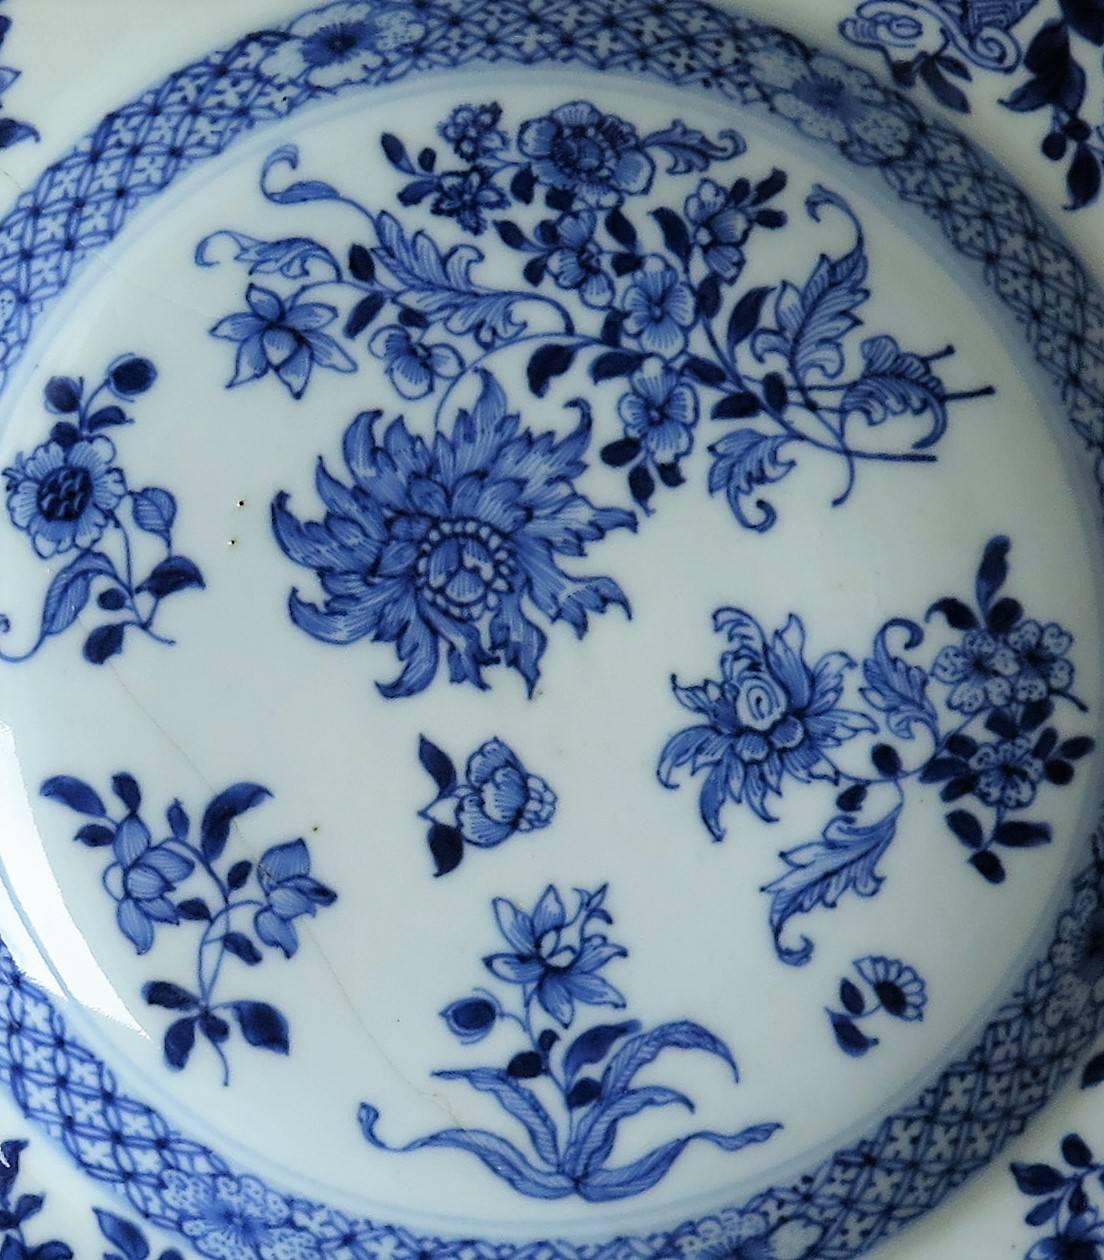 18th Century and Earlier Chinese Porcelain Plate or Bowl, Blue and White, Floral Sprigs, circa 1770